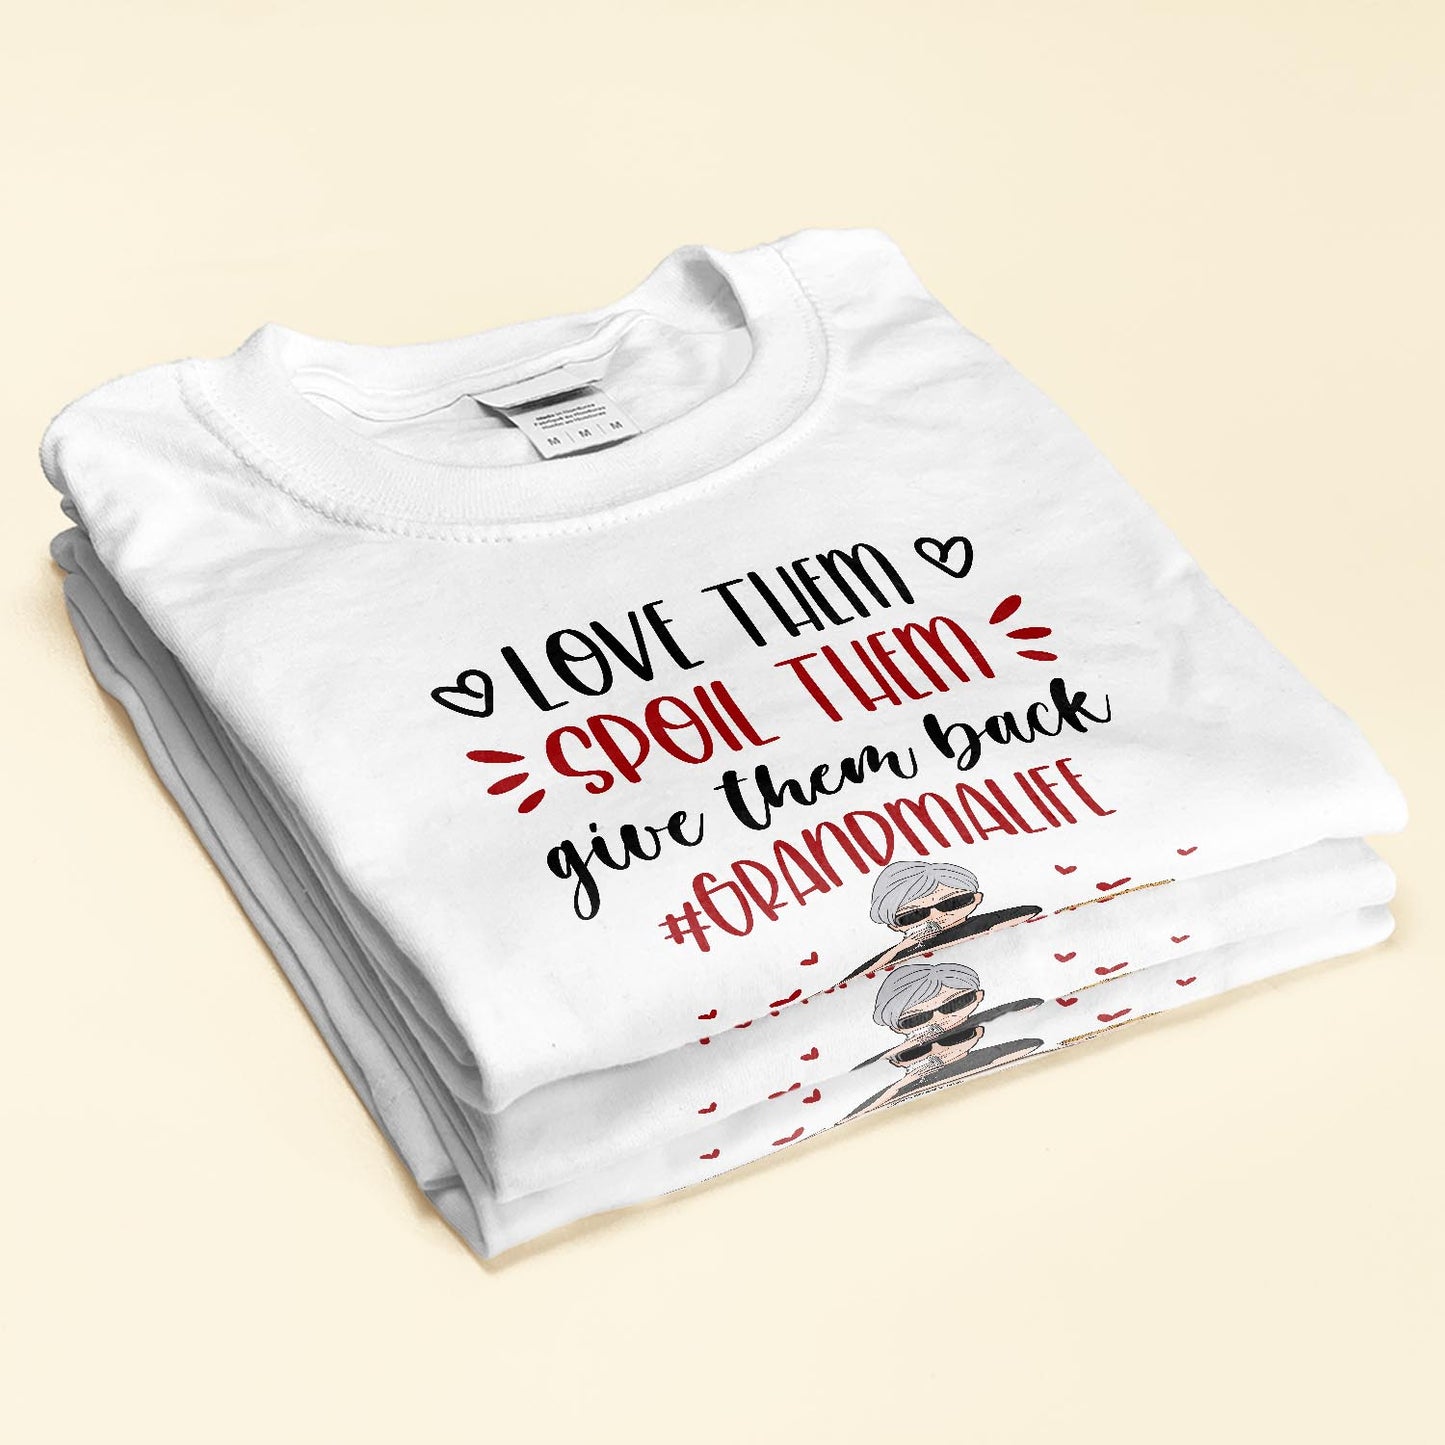 Love Them Spoil Them Give Them Back - Personalized Shirt